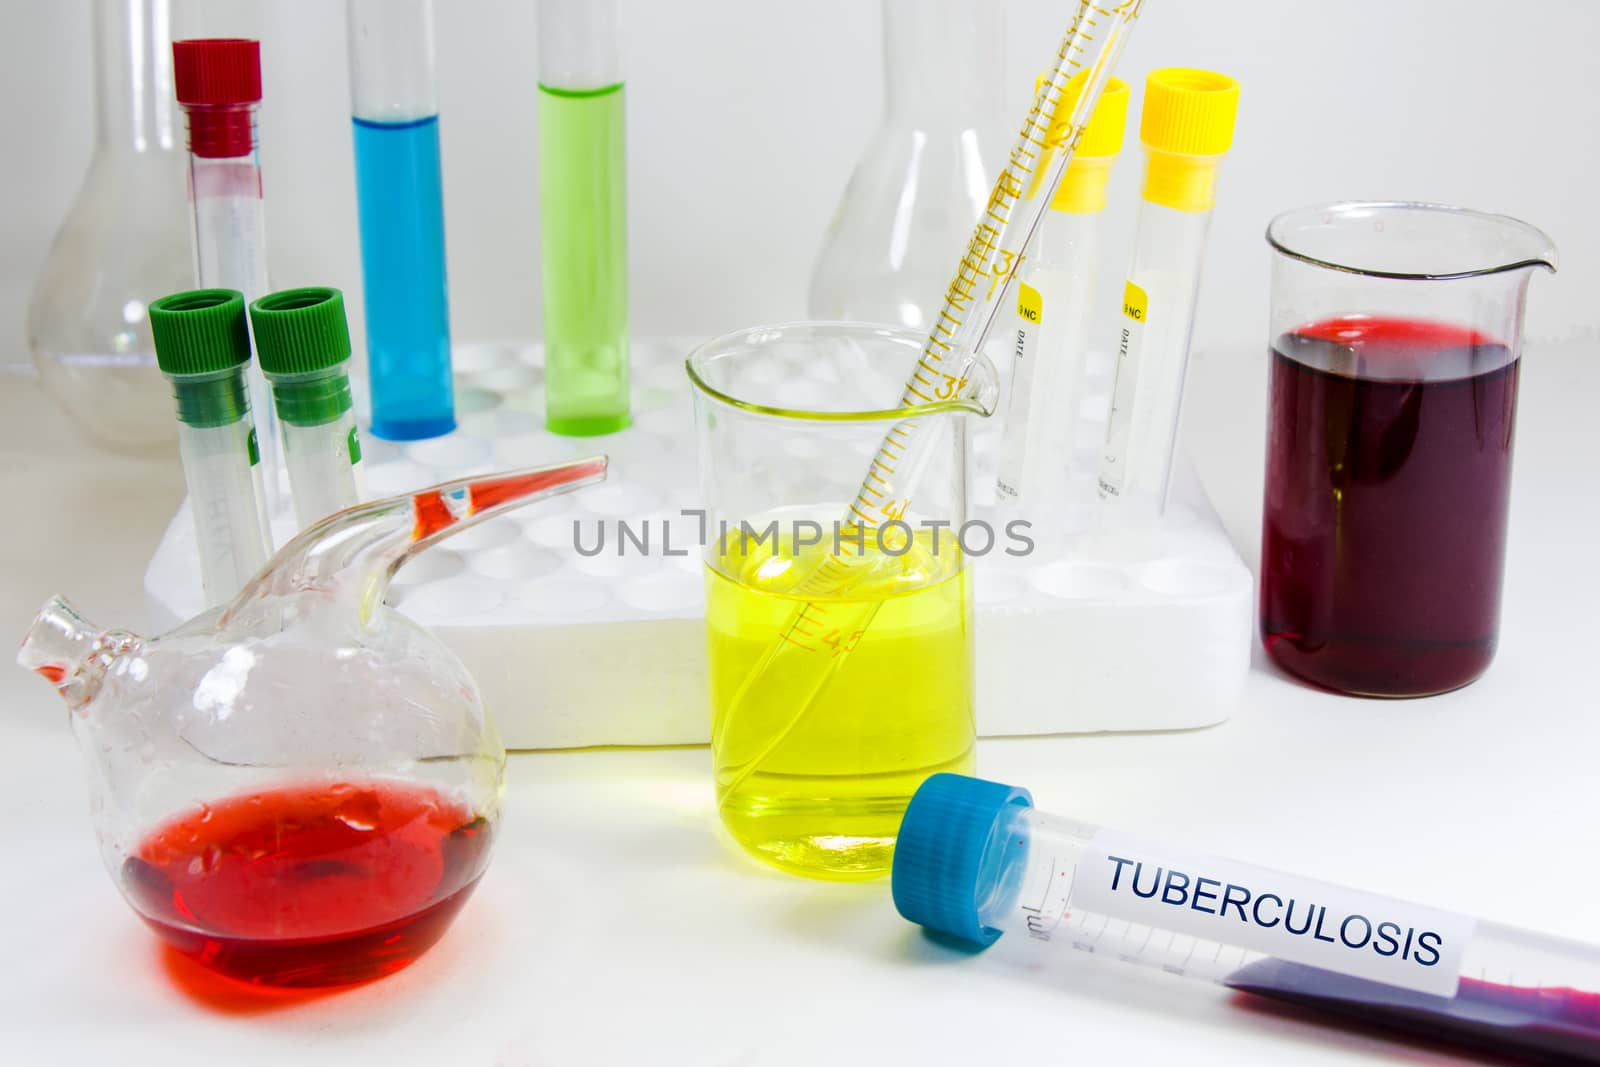 Tuberculosis blood test tube, laboratory and chemical instruments, diagnoses and research, vaccination for tuberculosis. Studio shoot on the white background.